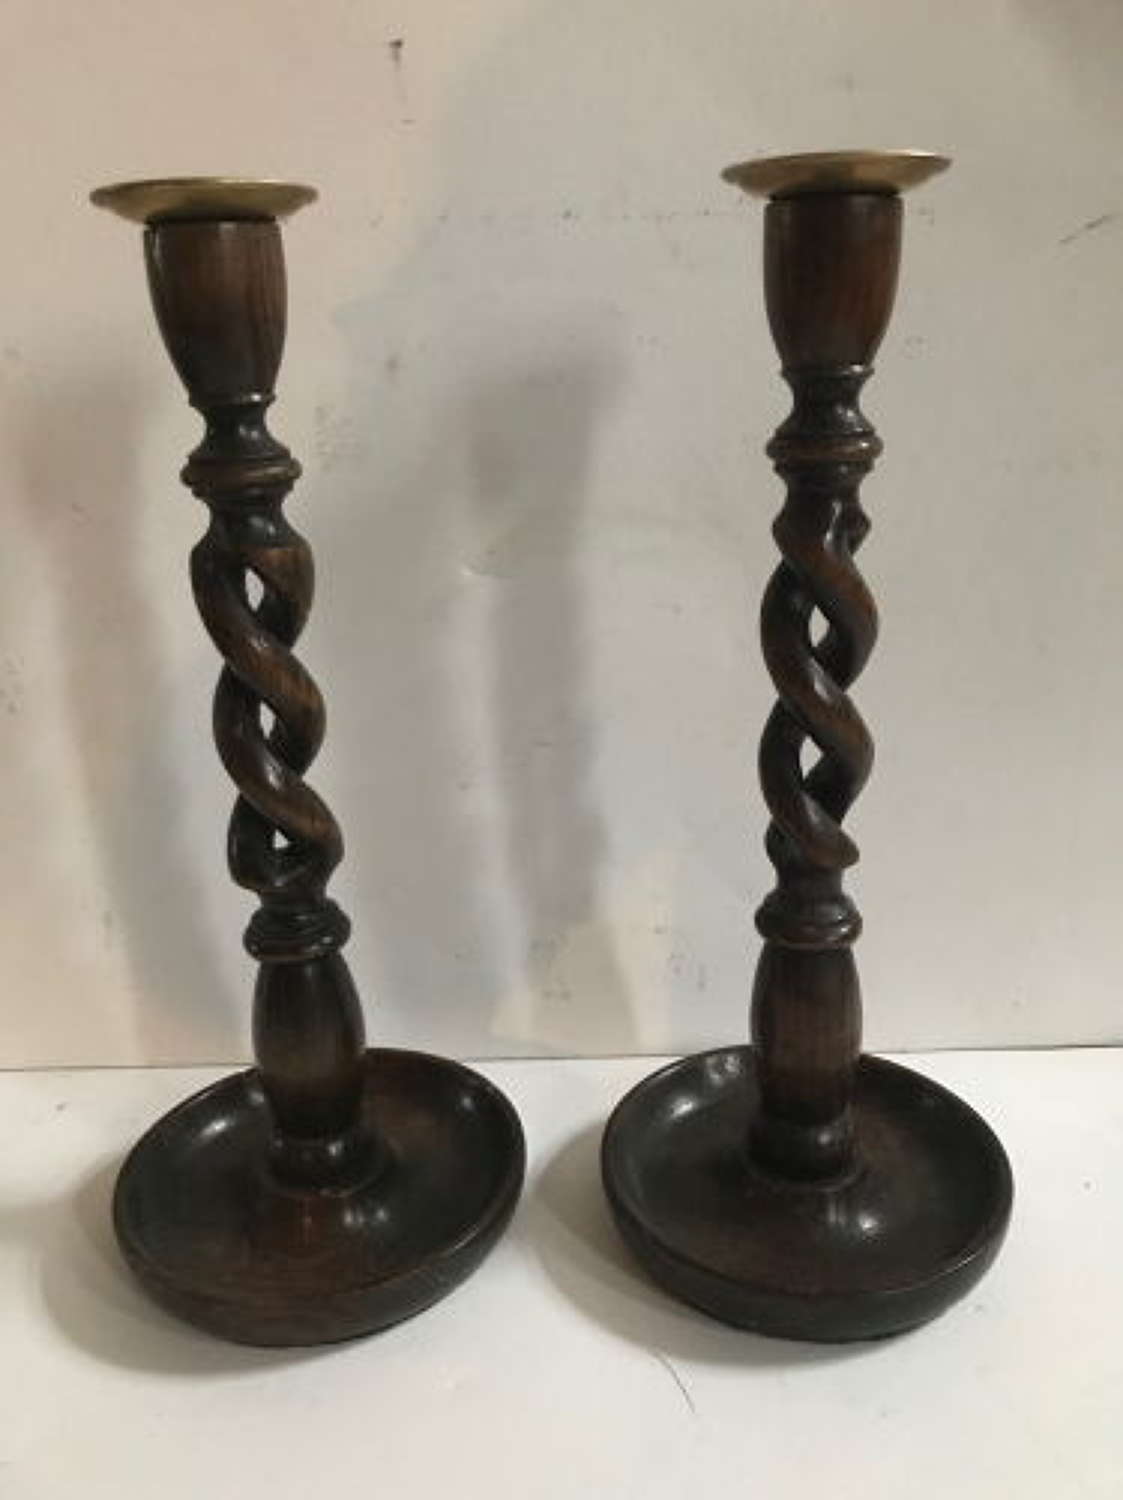 Pair of Wooden Early 20th Century Candlesticks